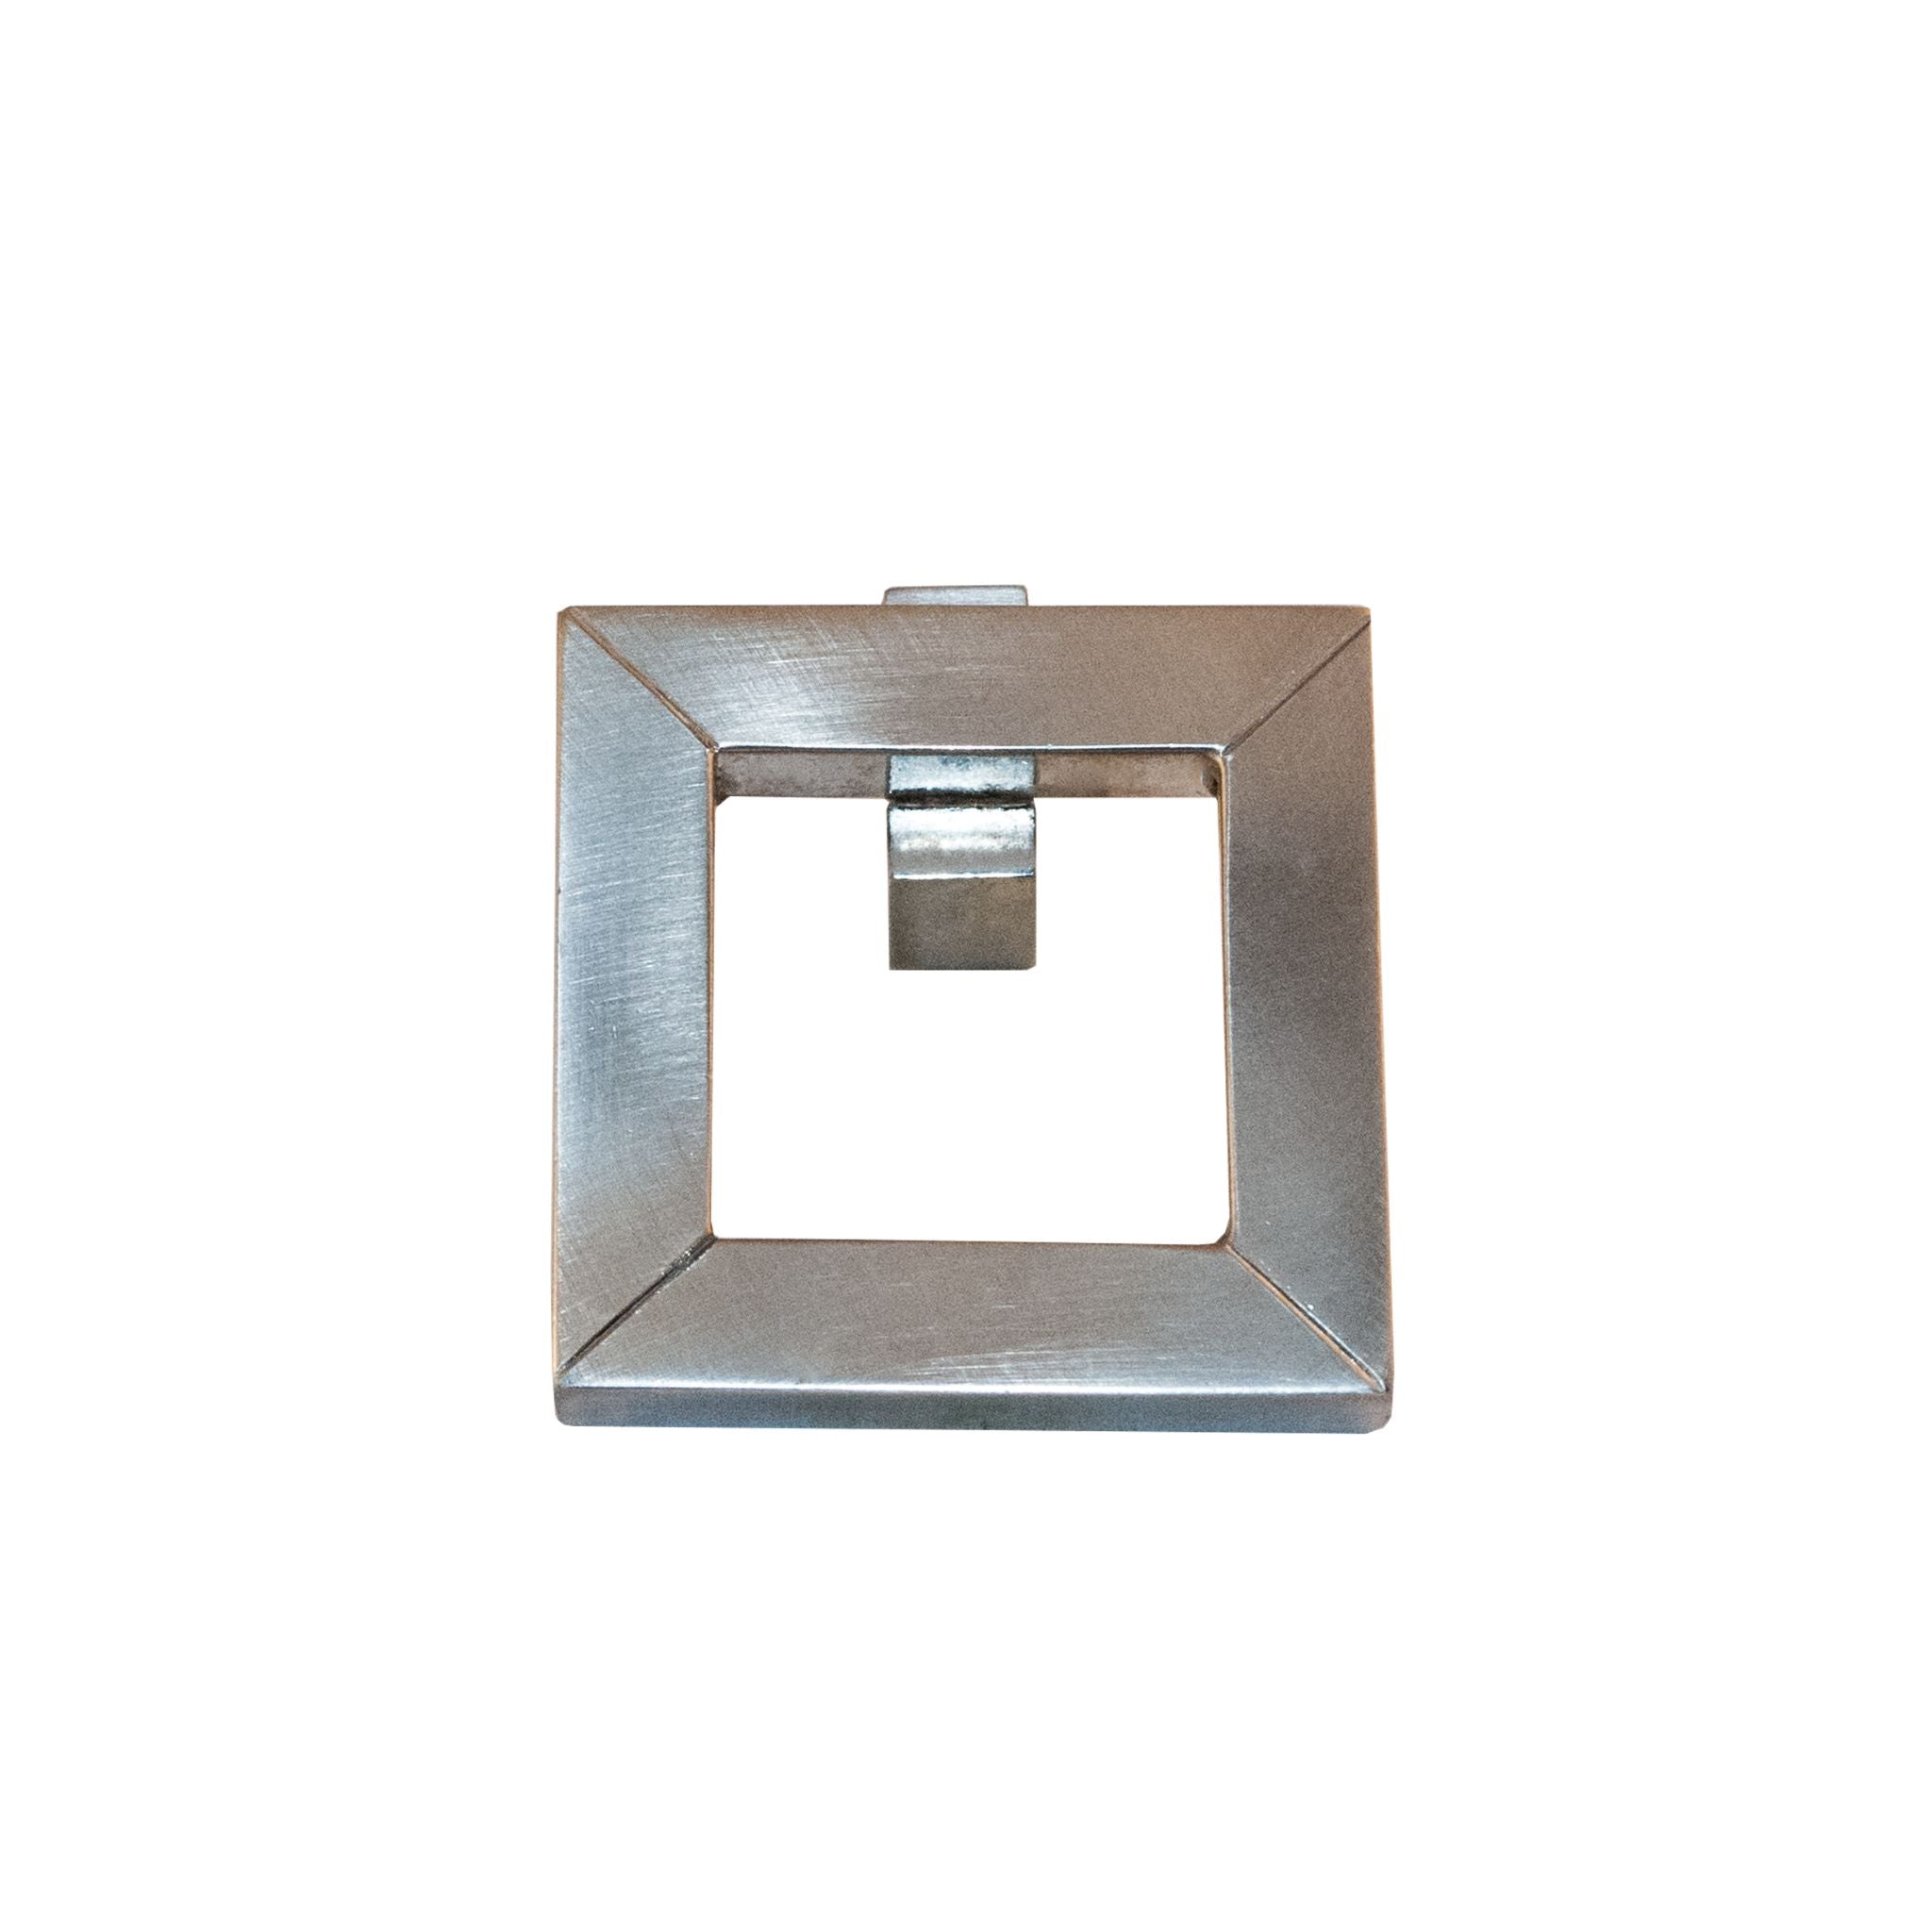 Square brass knob with a smooth, polished finish, suitable for cabinets, drawers, and doors.